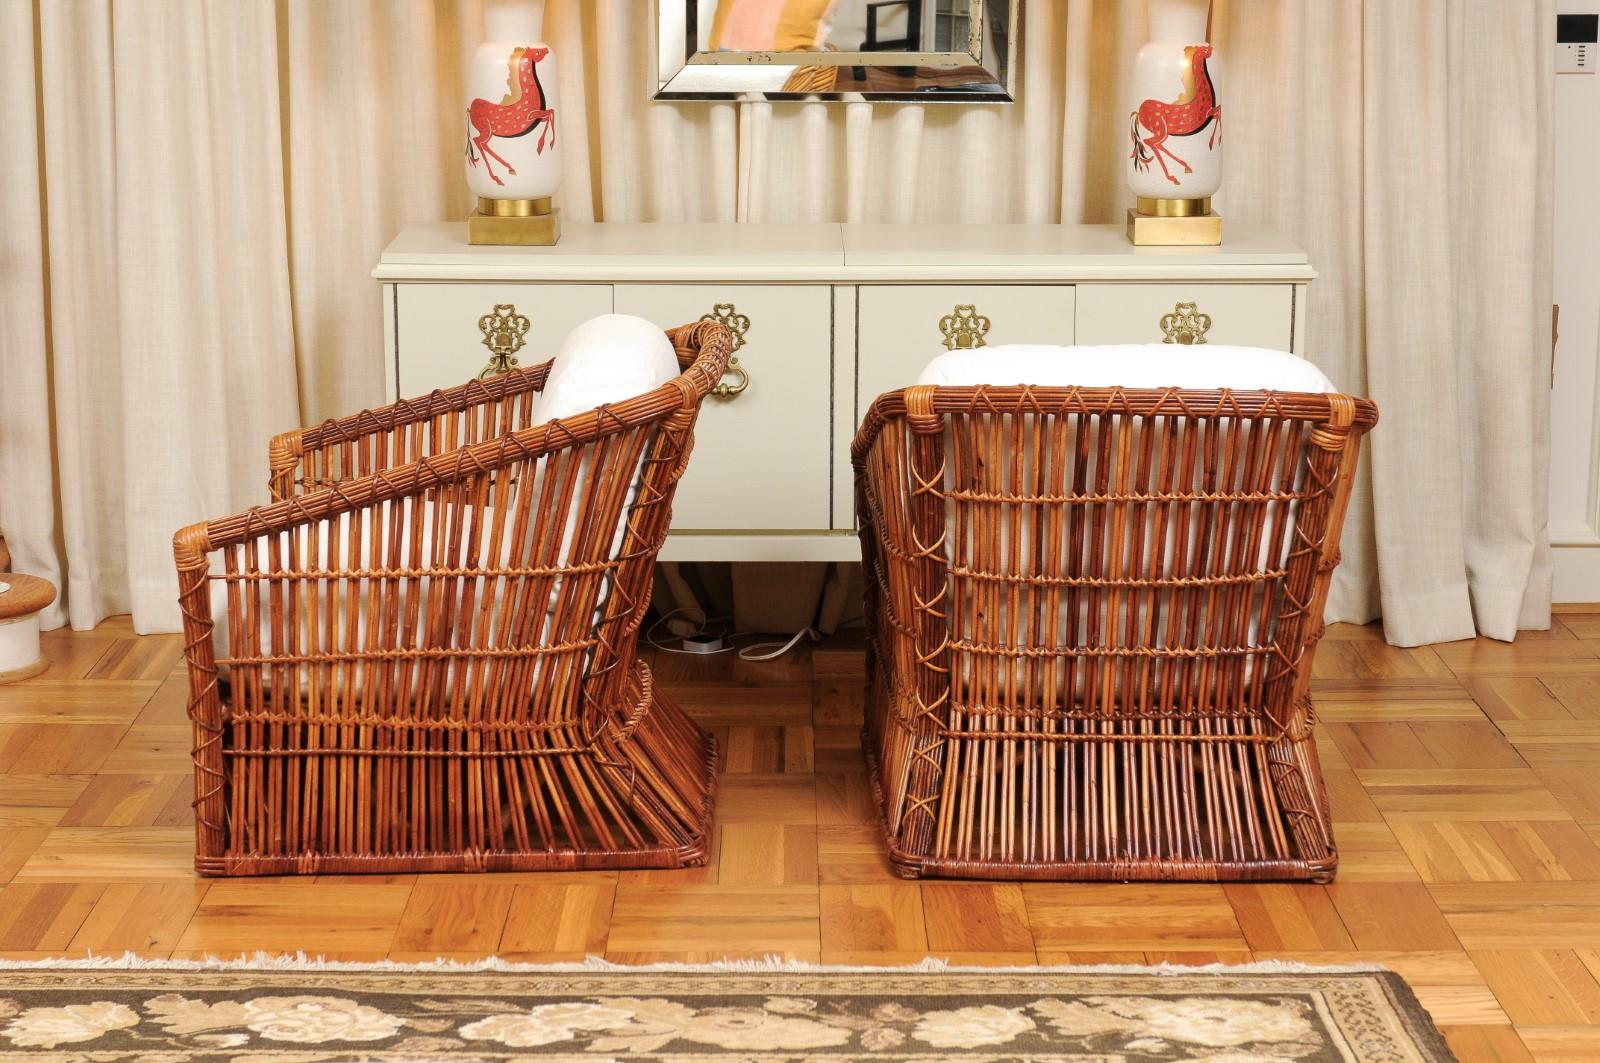 Exceptional Pair of Rattan and Cane Basket Loungers by McGuire, Circa 1975 For Sale 3